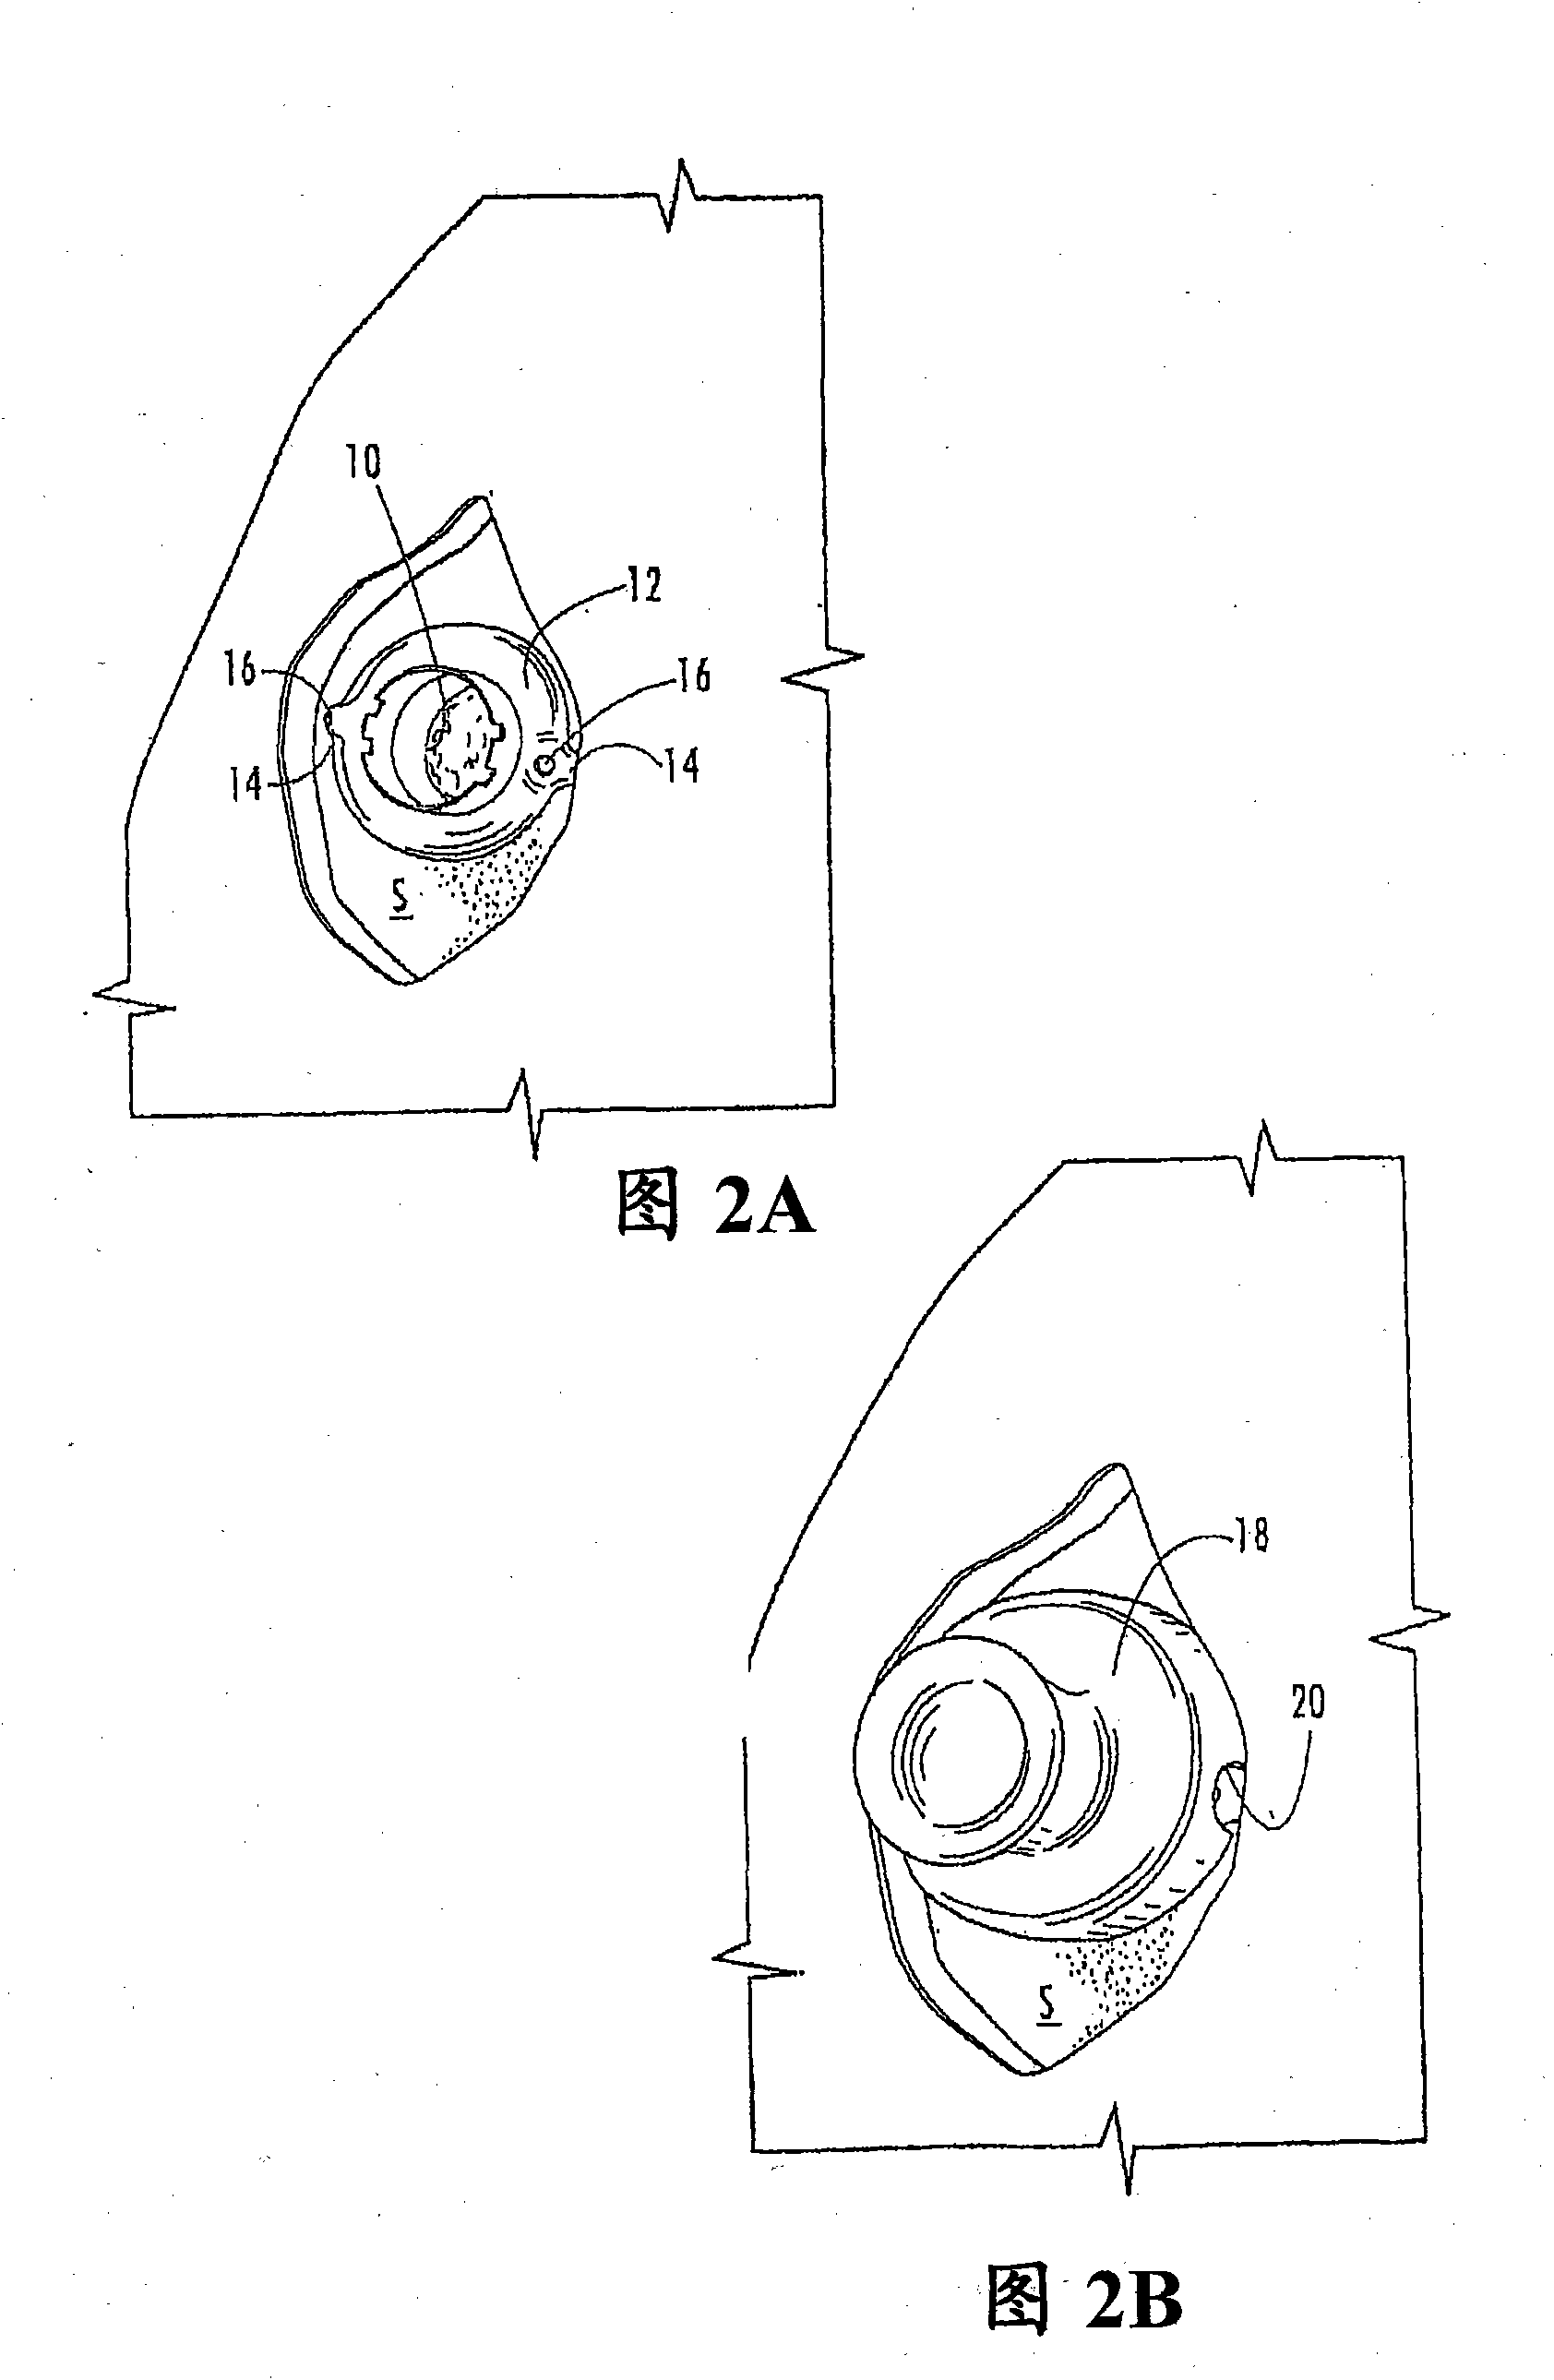 Mri-guided medical interventional systems and methods